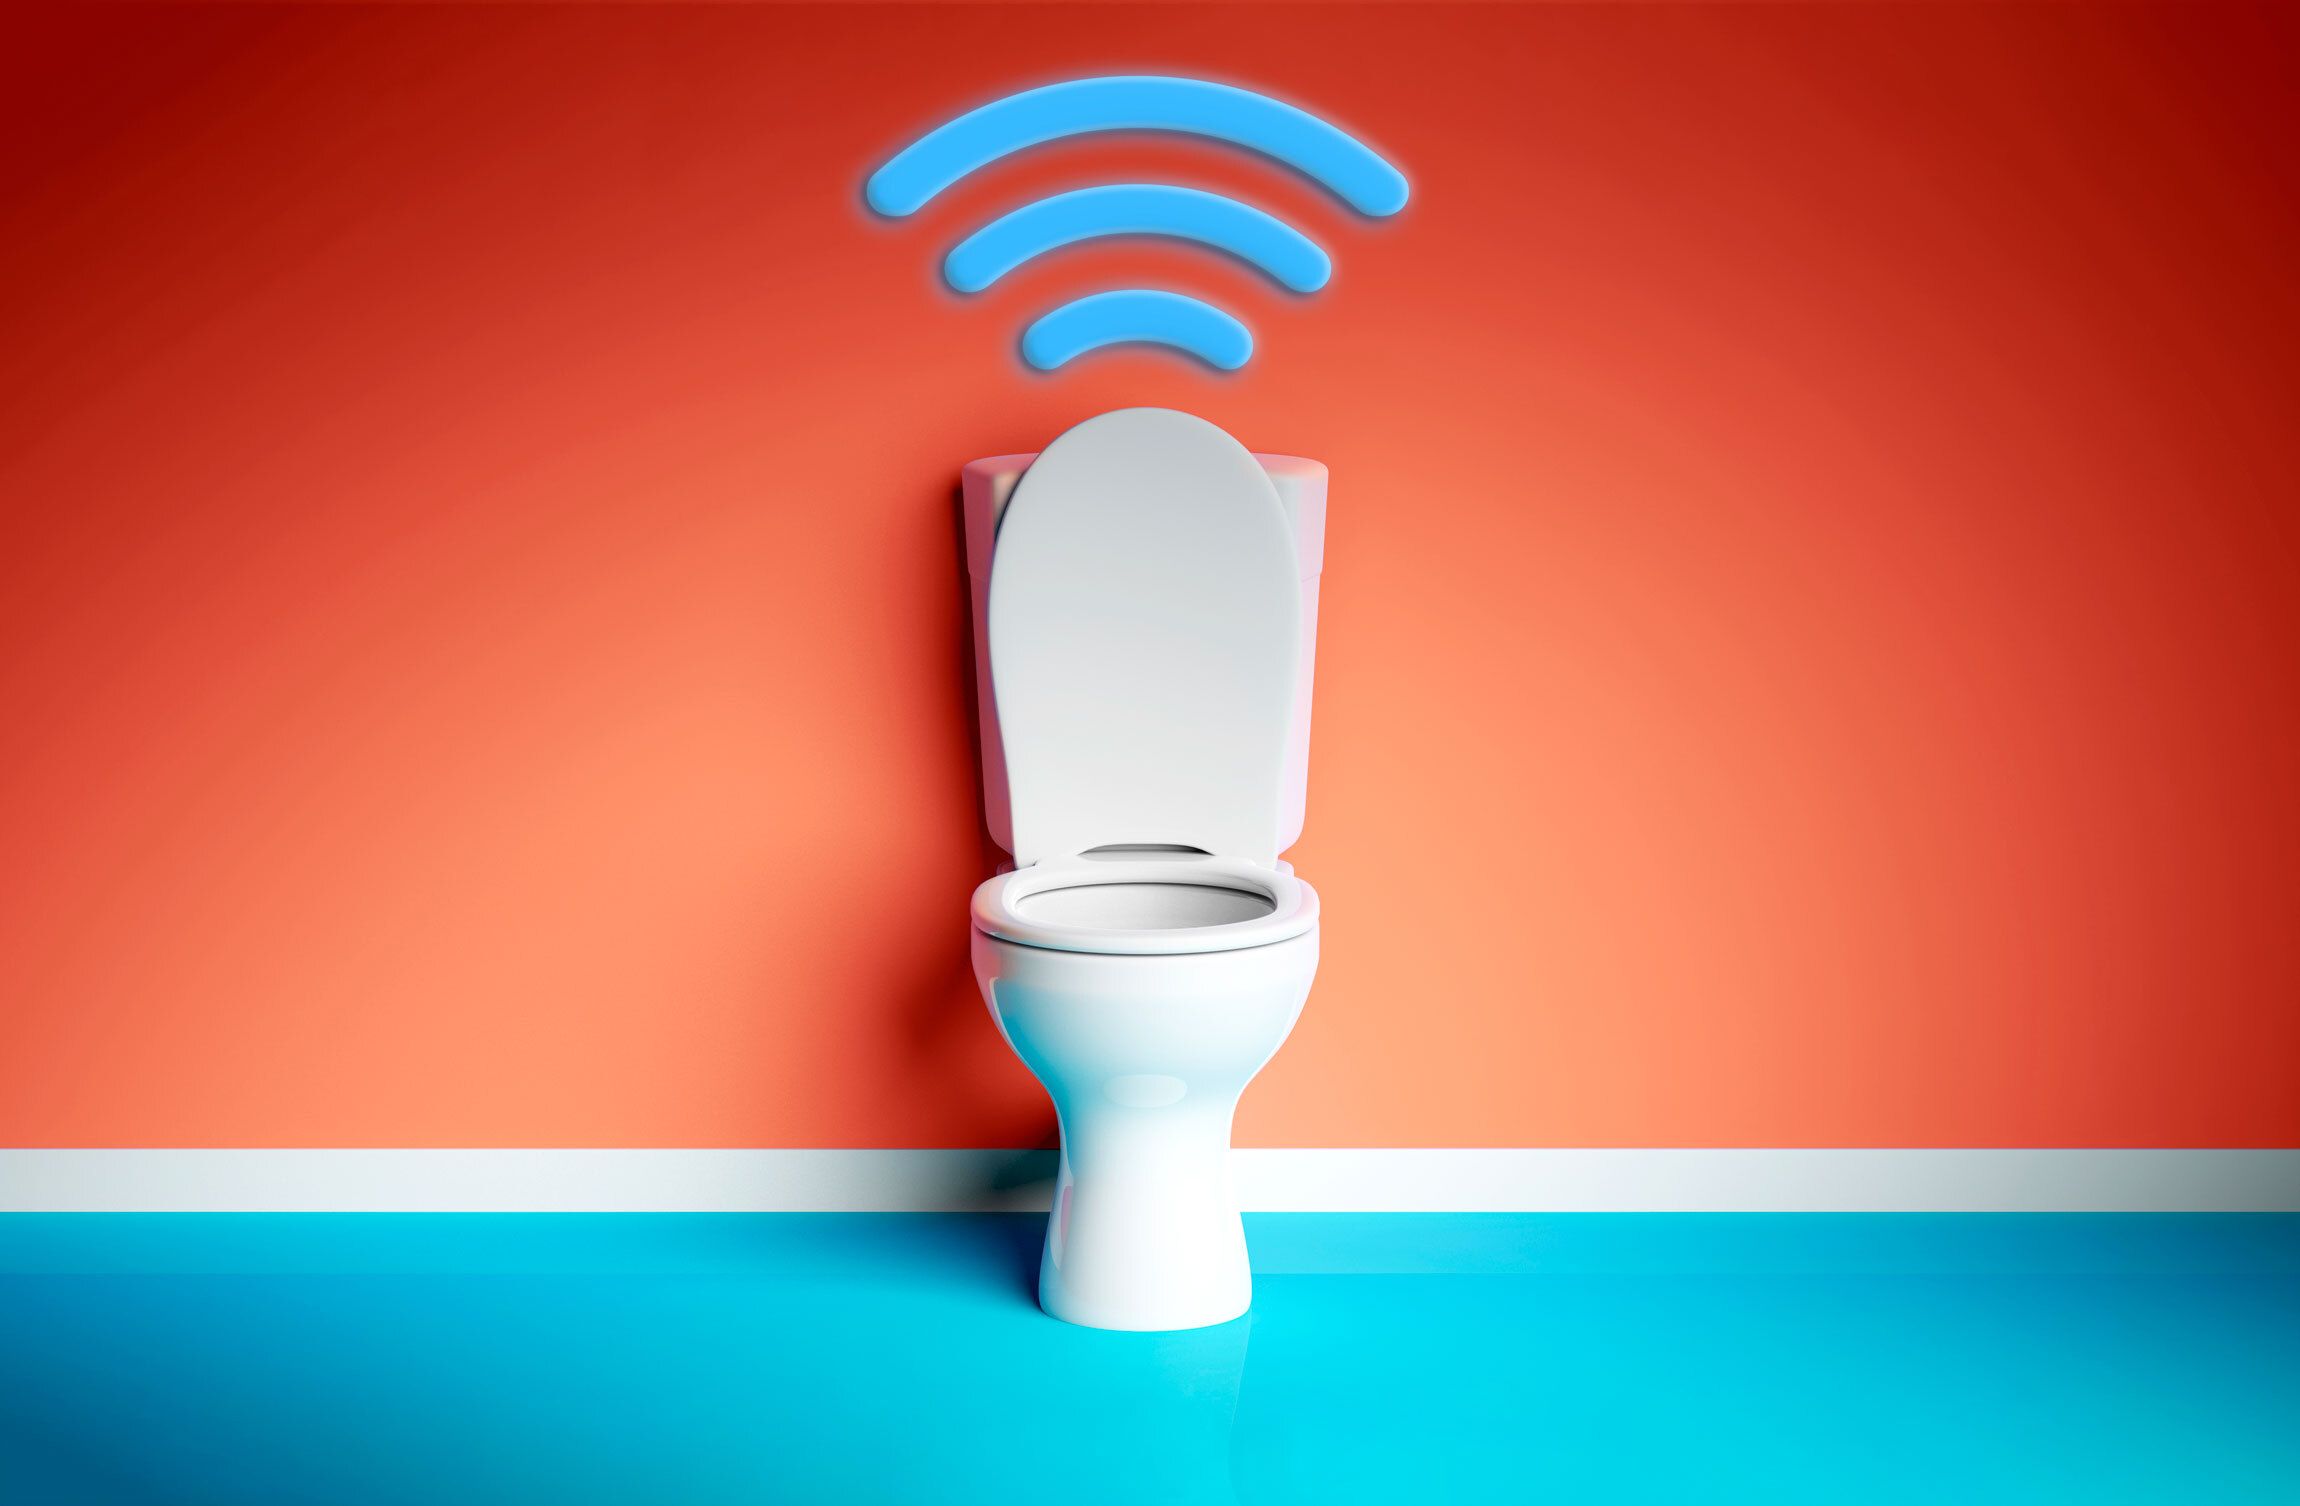 Here's how smart toilets of the future could protect your health